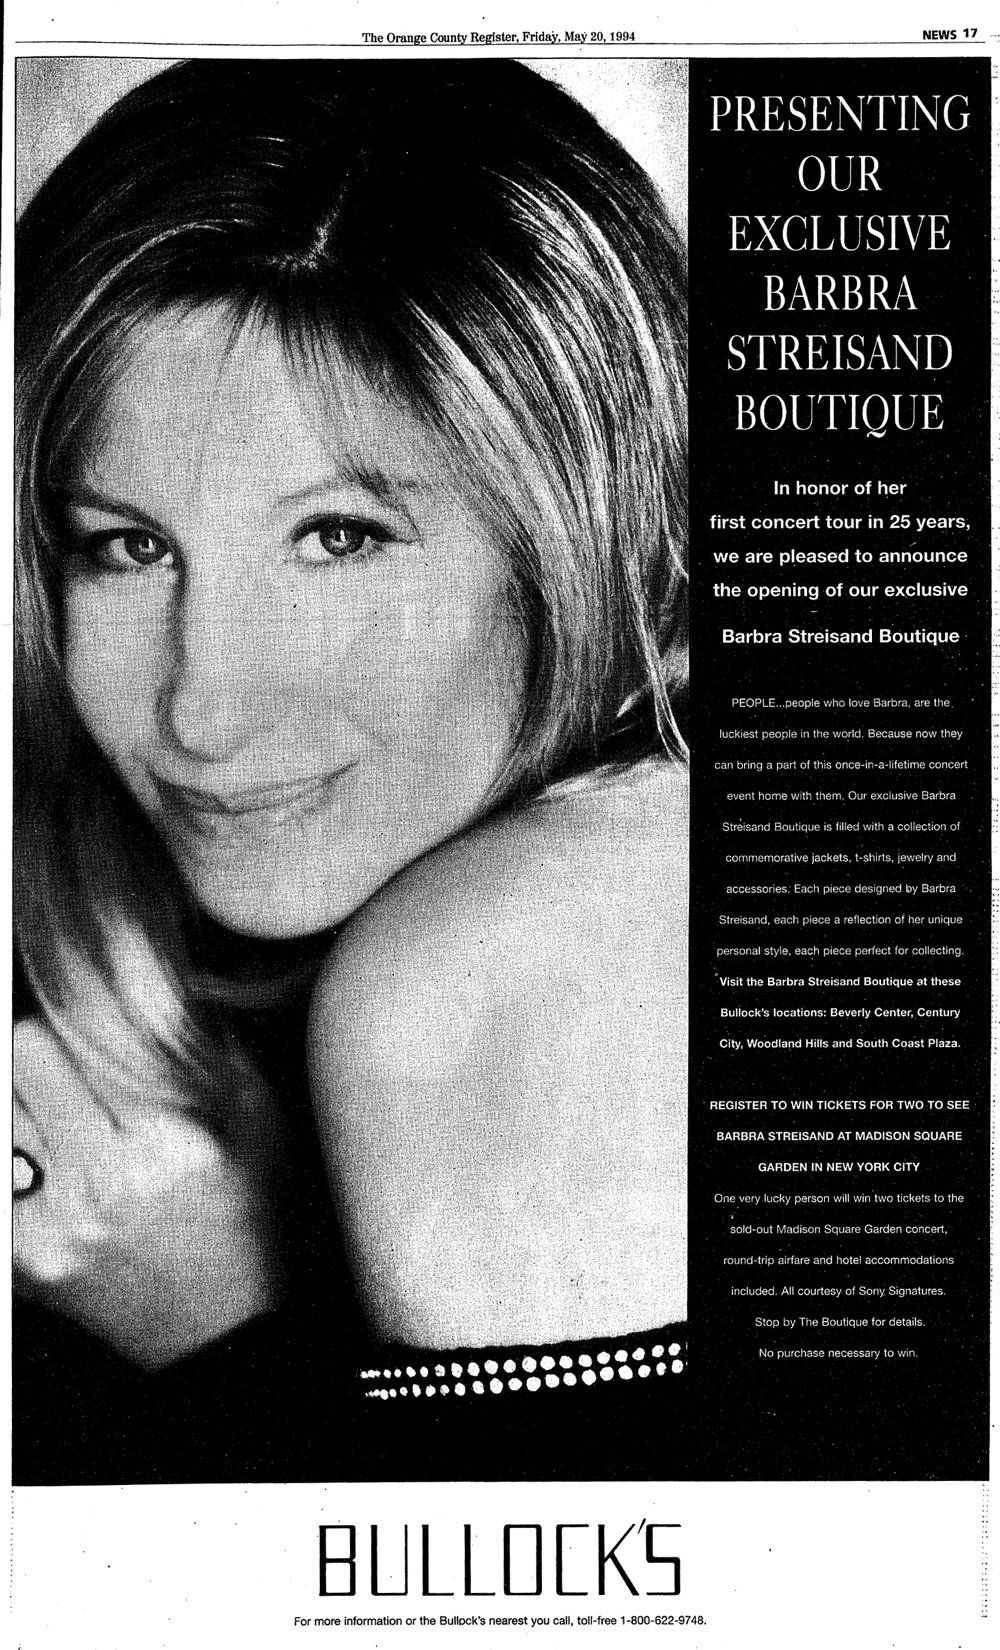 Ad for a Streisand Boutique at the department store Bullock's.